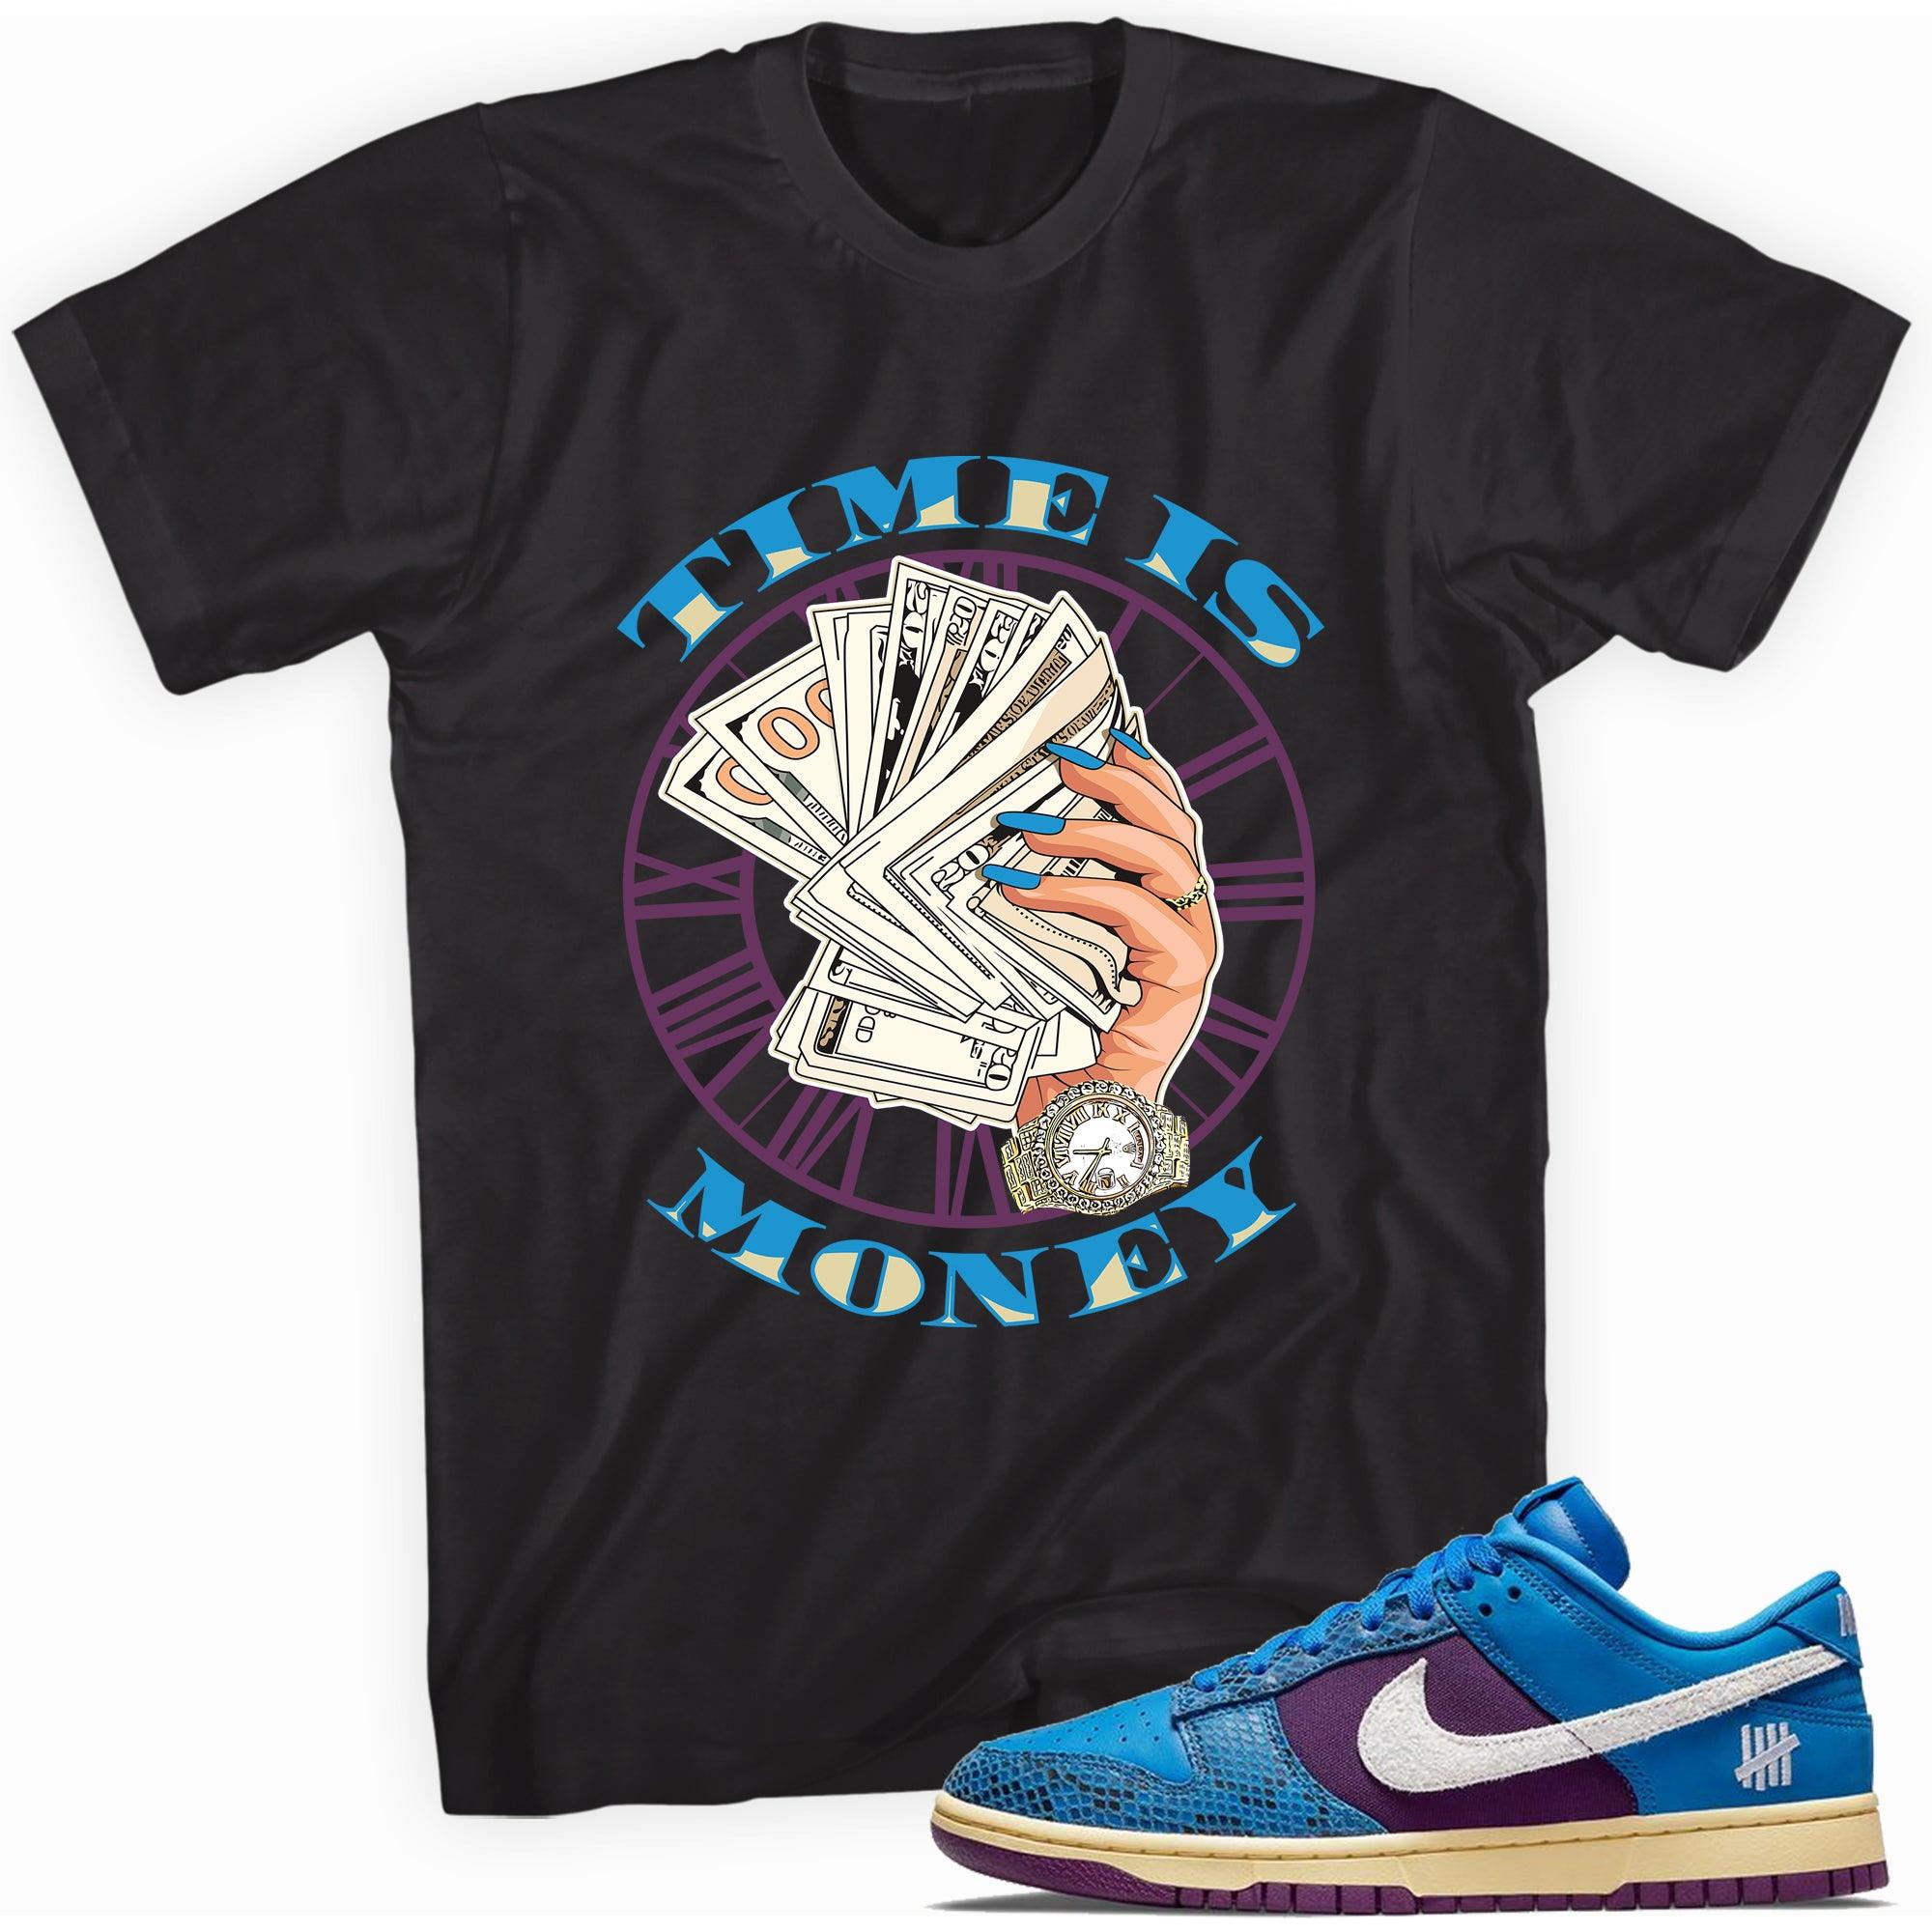 Black Time Is Money Shirt Nike Dunk Low Undefeated 5 On It Dunk vs AF1 photo